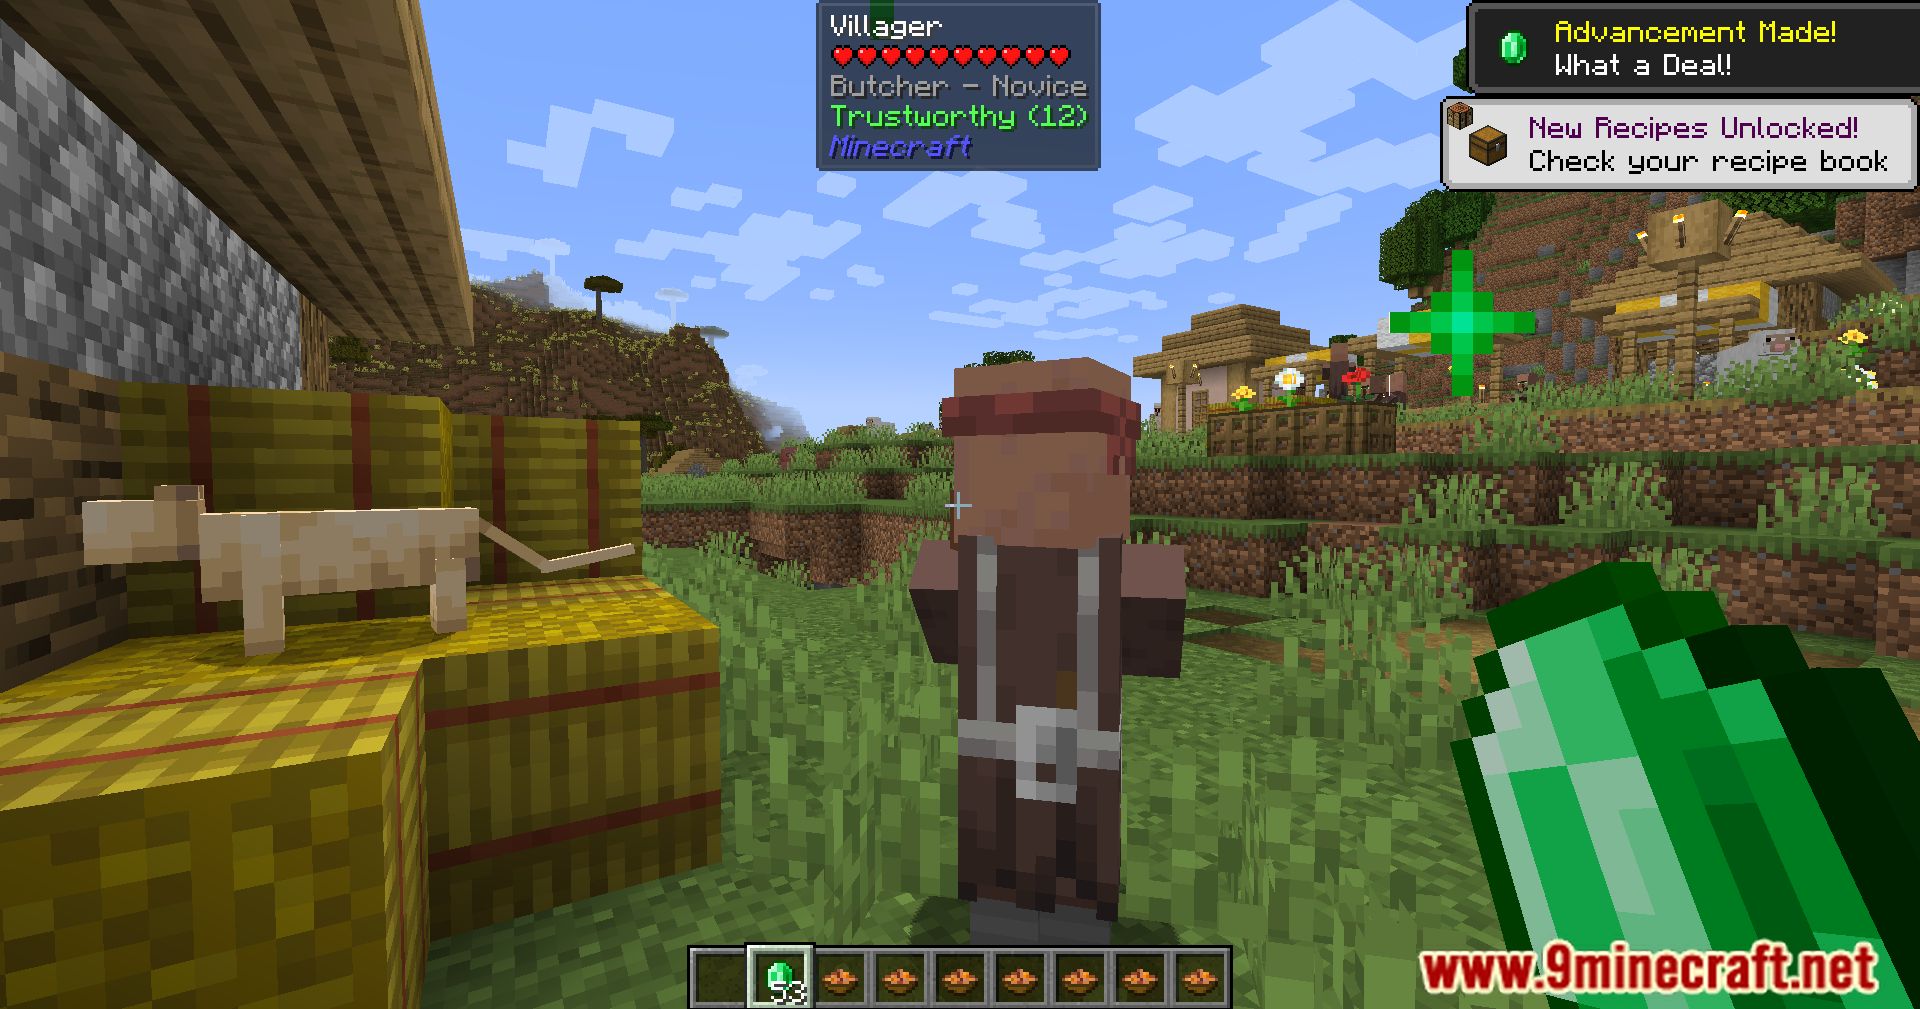 Your Reputation Mod (1.20.4, 1.19.4) - Villager Relations Refined 5